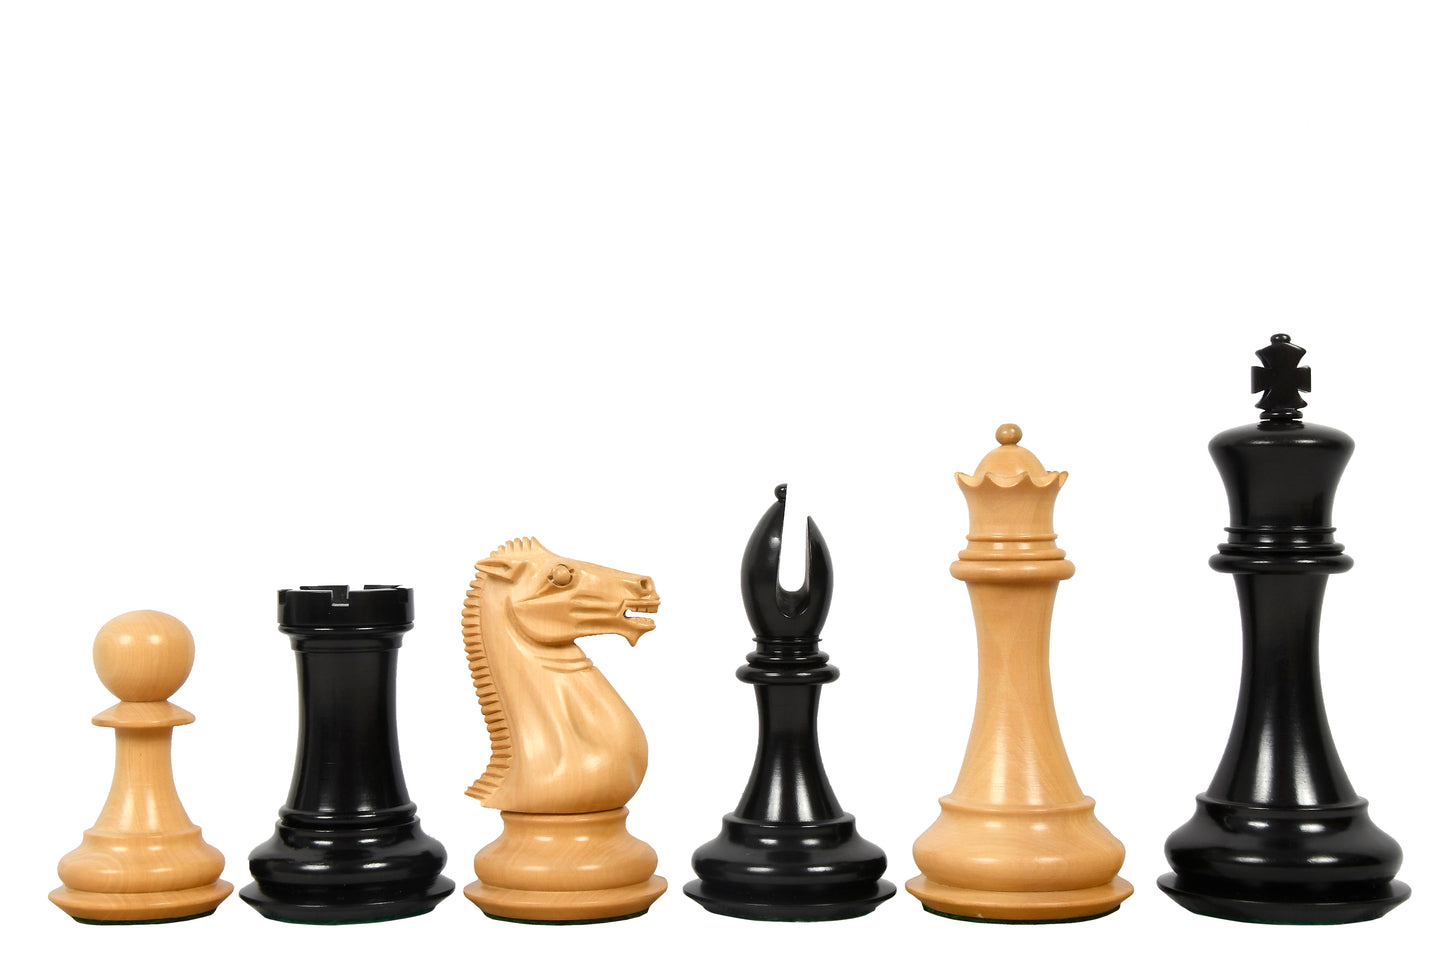 The Old Collector's Club Staunton Series Chess Pieces in Ebony and Boxwood - 4.4" King